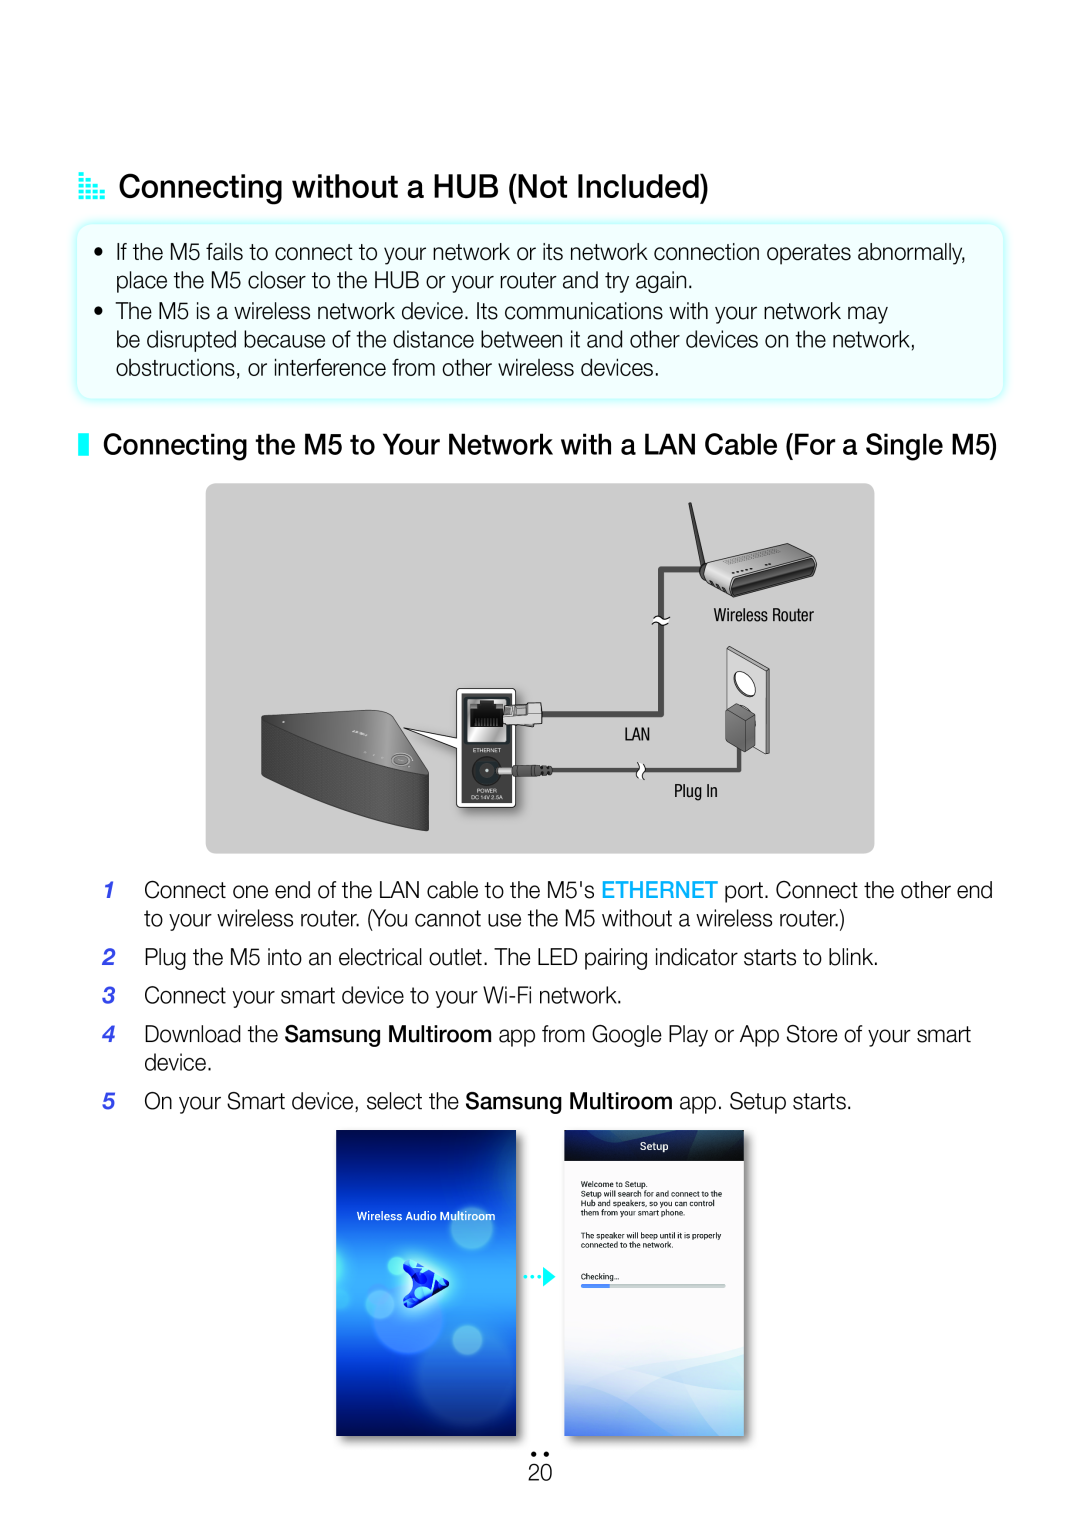 Samsung AA Connecting without a HUB Not Included, Connecting the M5 to Your Network with a LAN Cable For a Single M5 